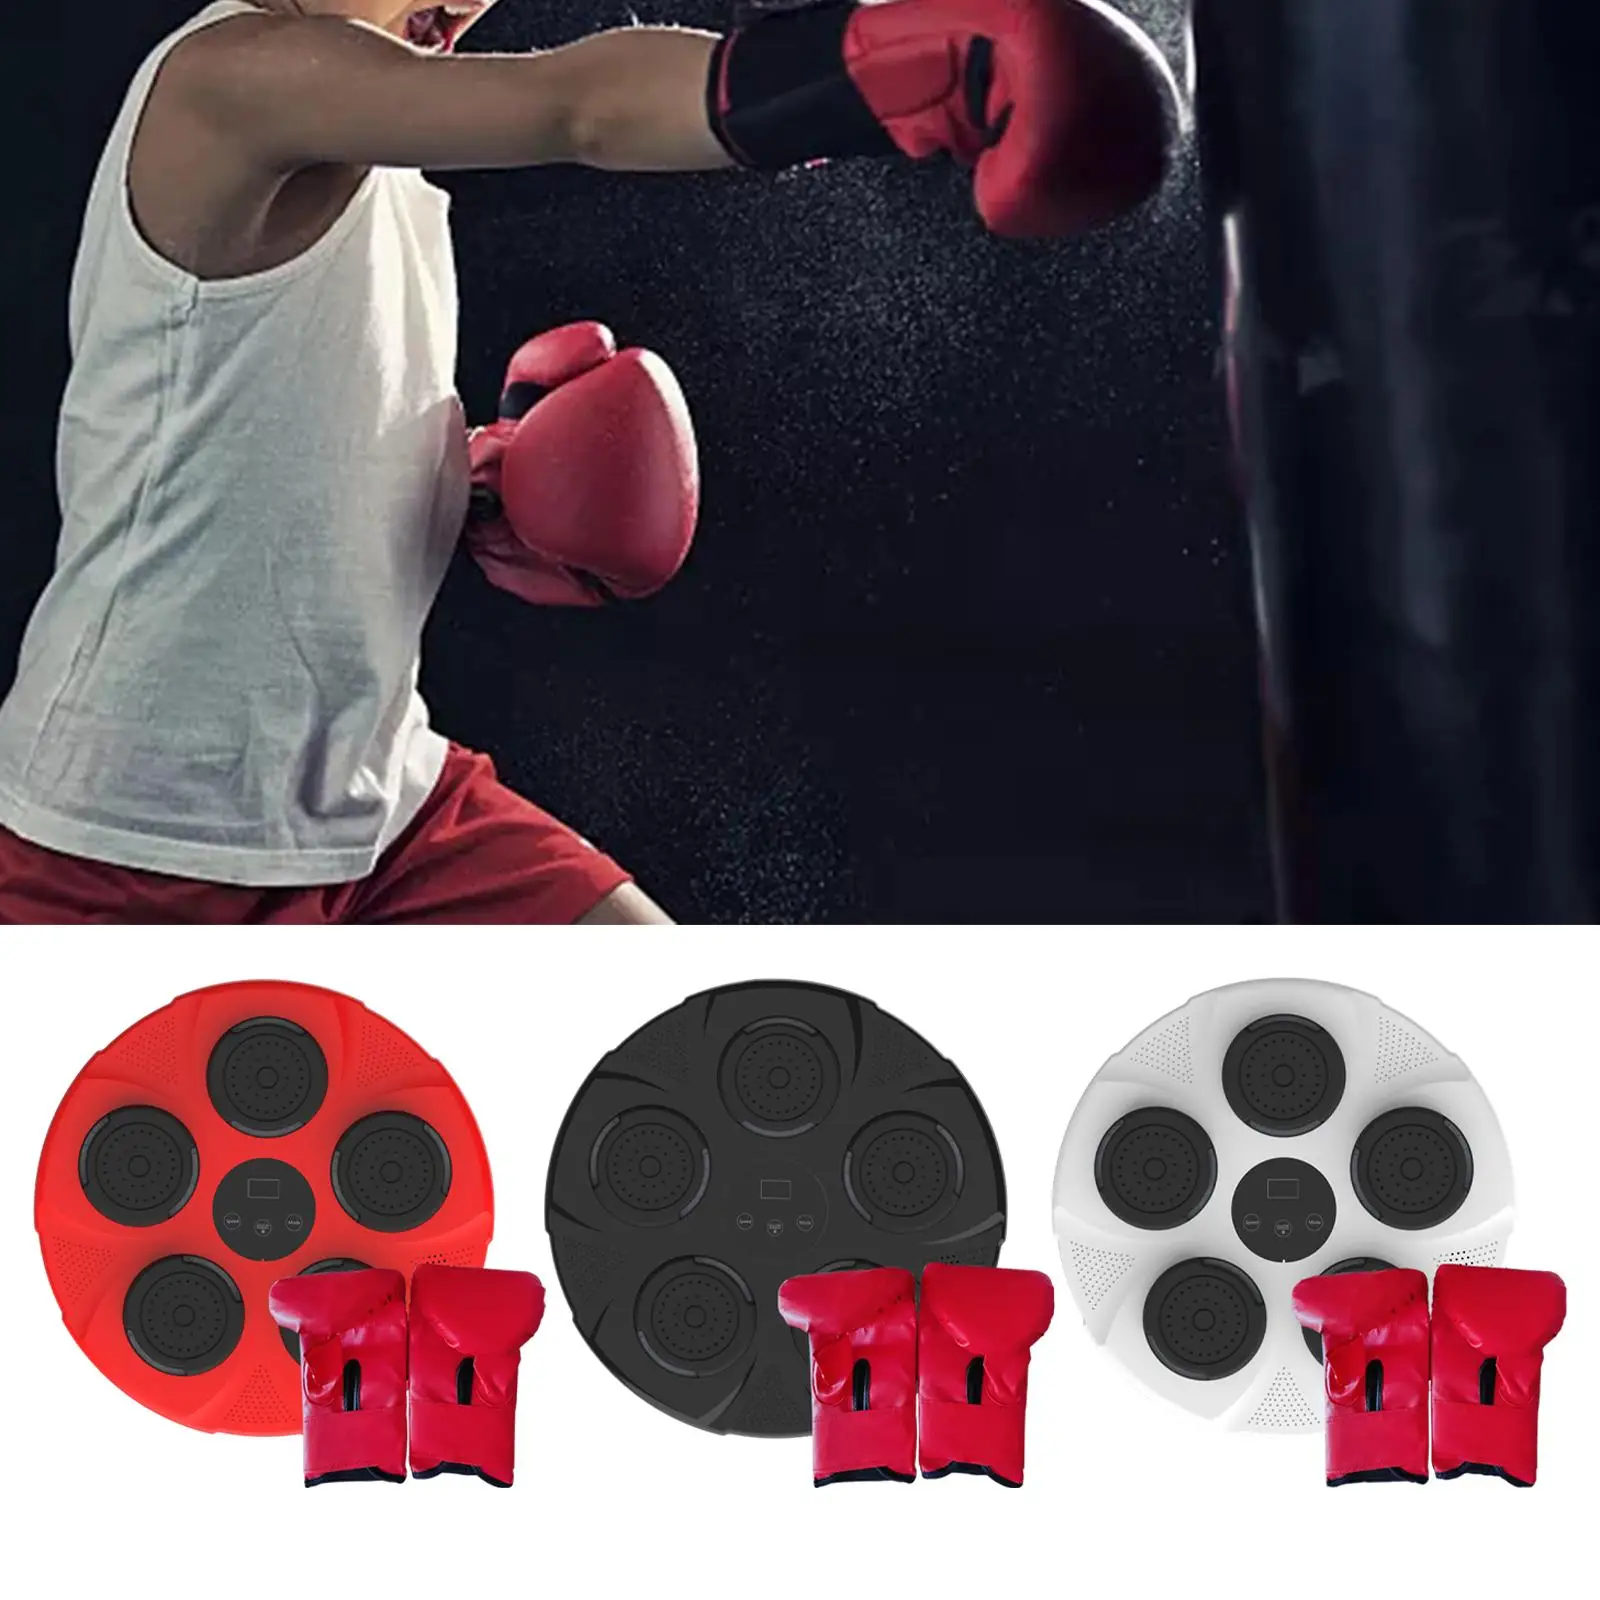 Boxing Machine Electronic Music Boxing Wall Target Boxing Trainer Wall Mount RGB Light for Home Karate Practice Gym Sports